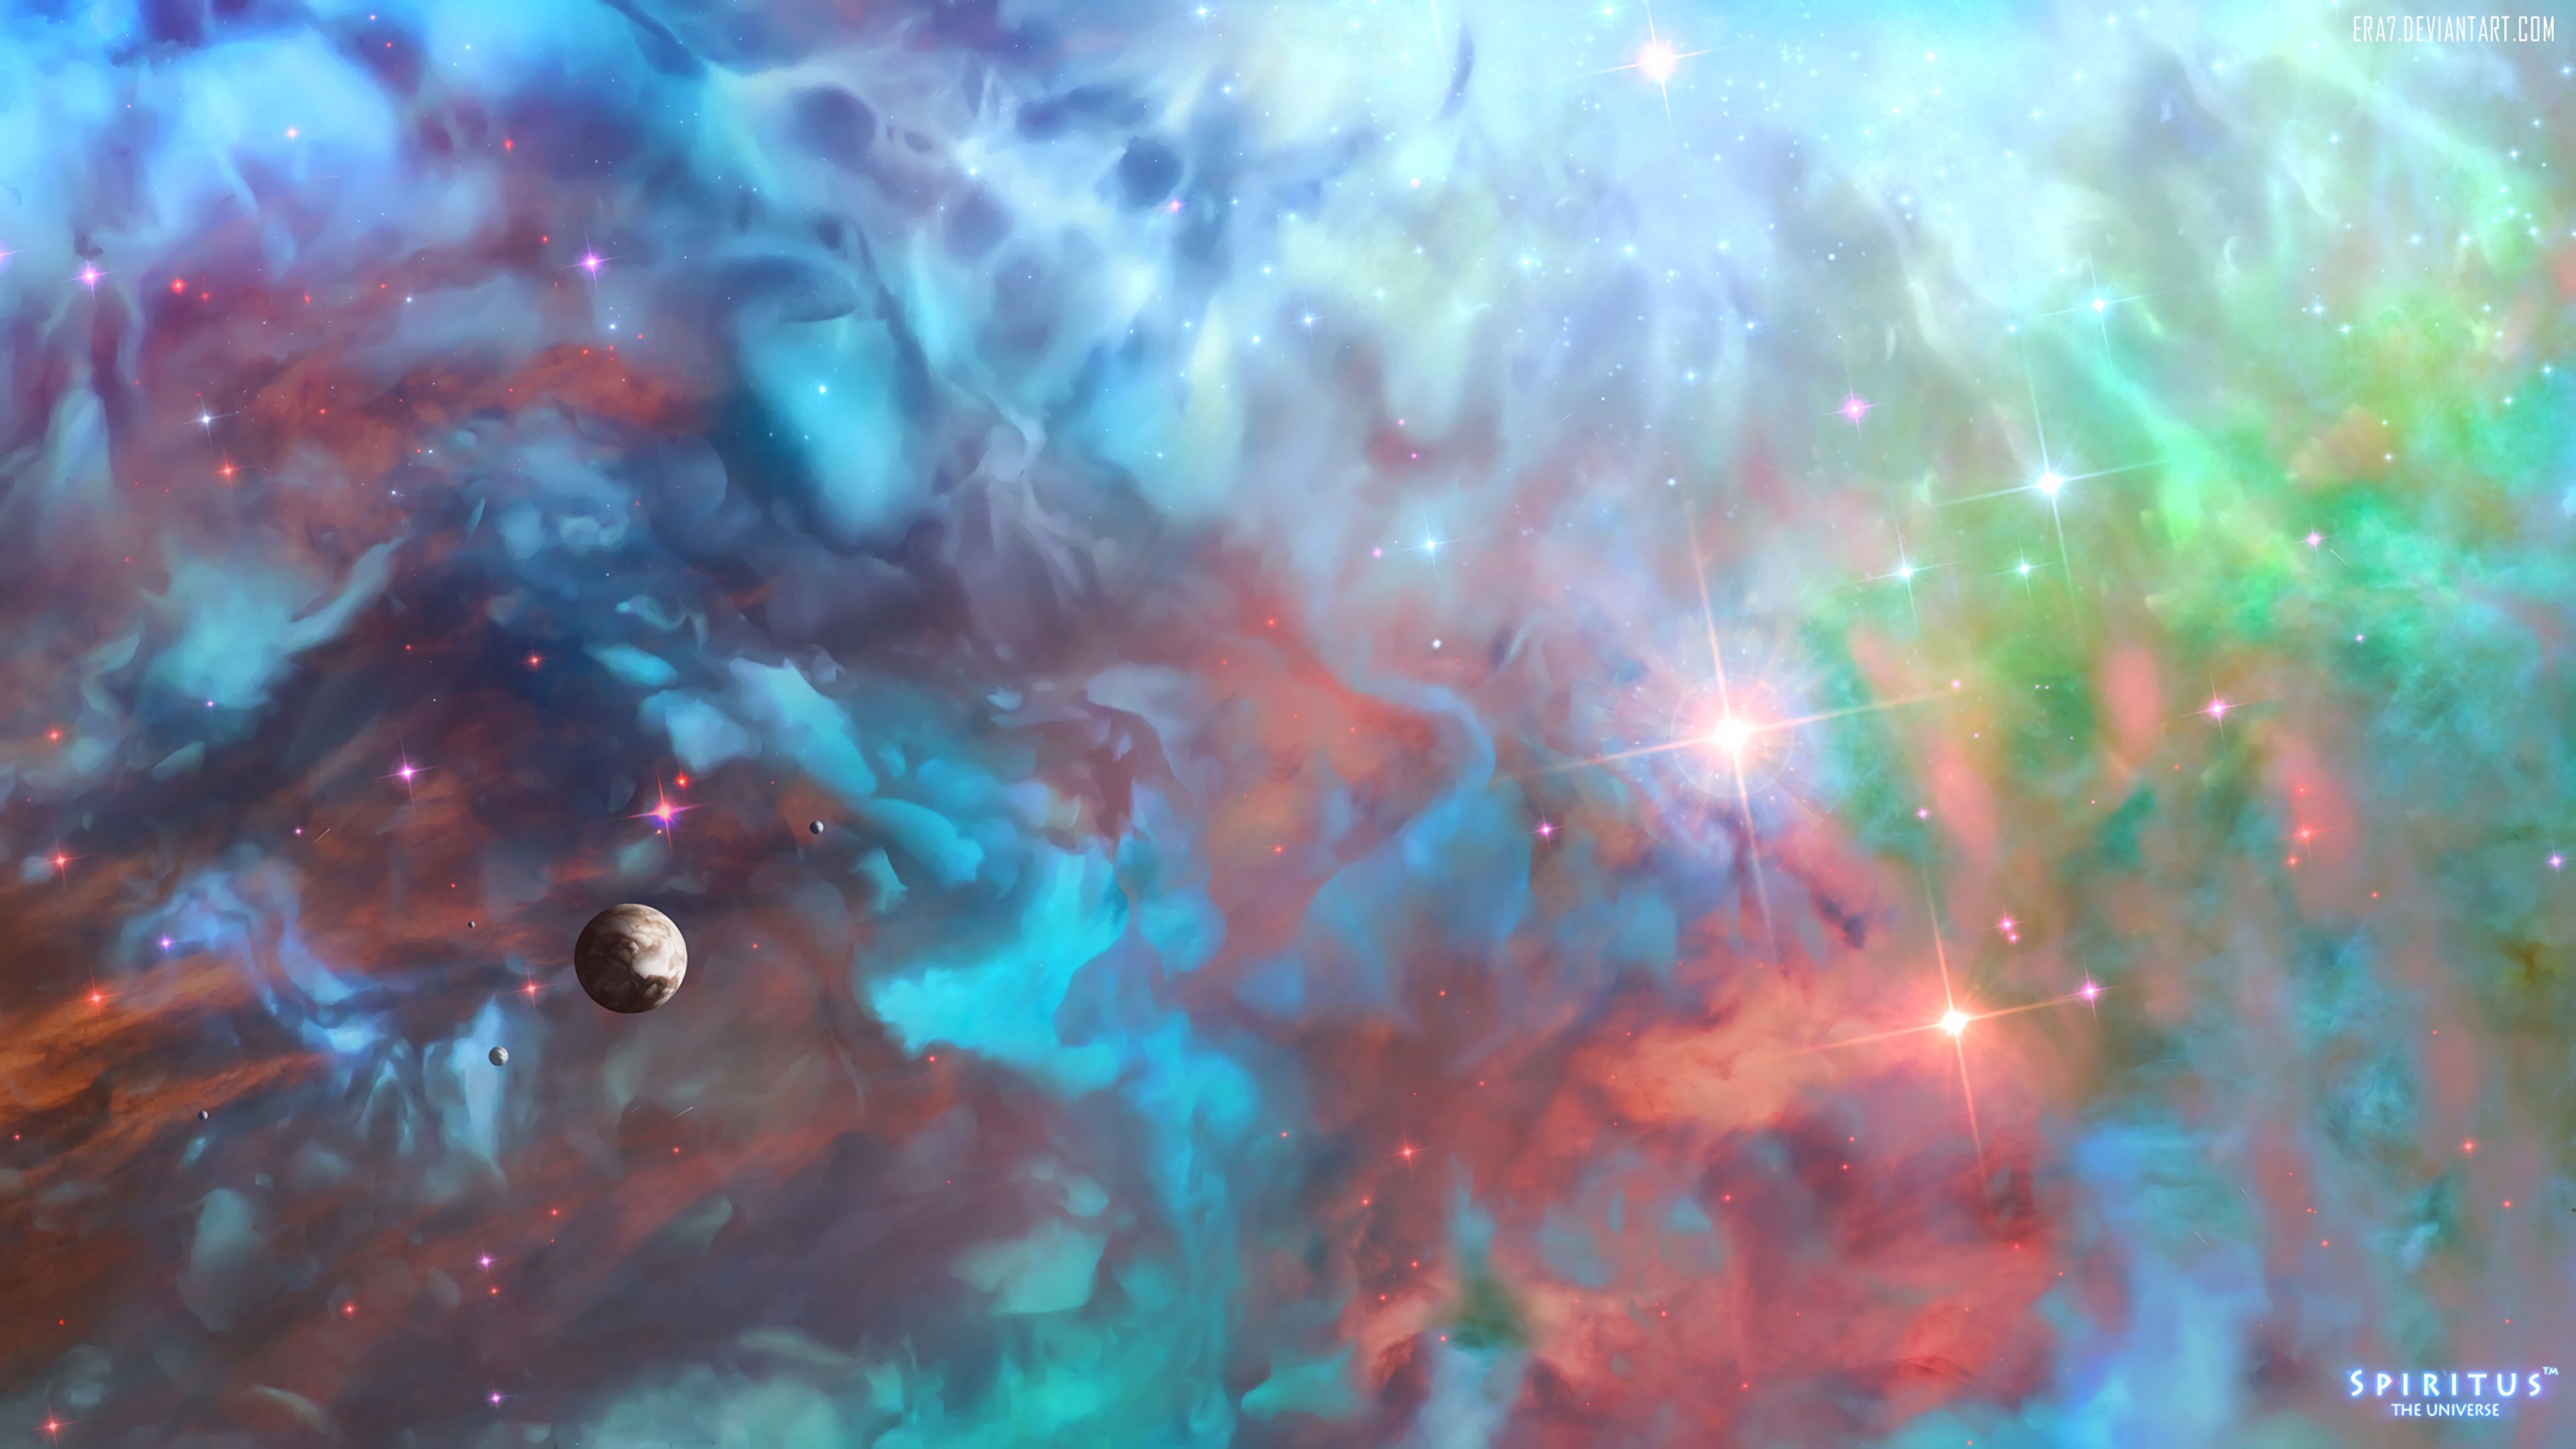 vertical wallpaper motley, planets, multicolored, universe, stars, clouds